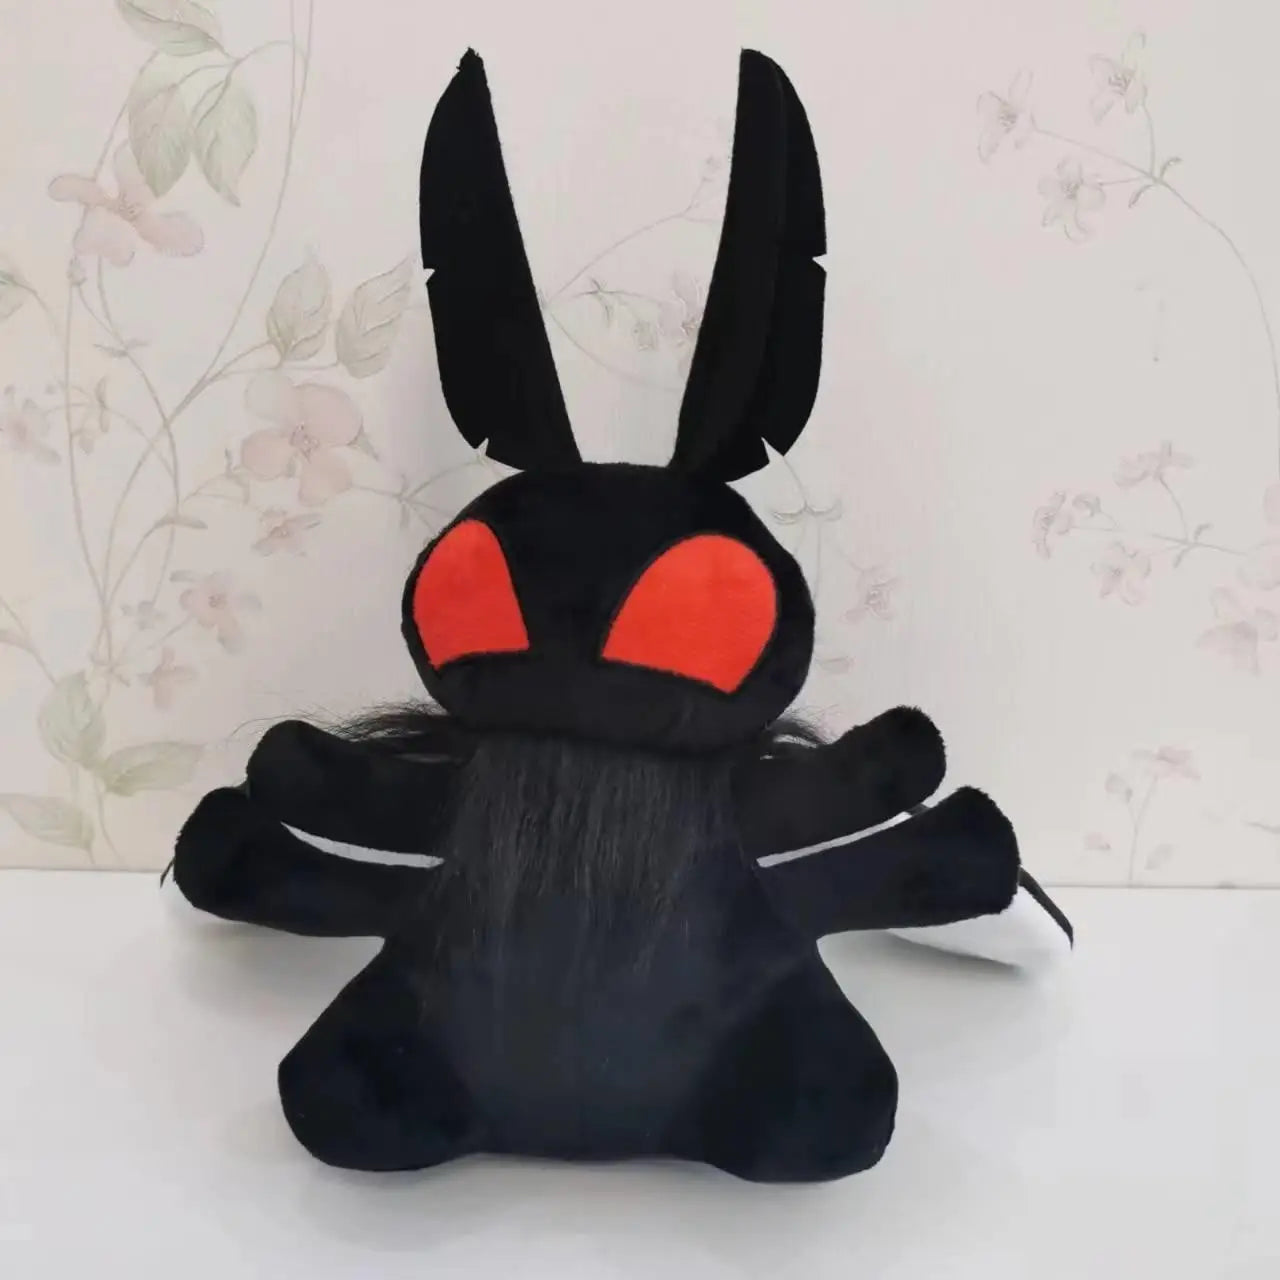 A black plushie shaped like the cryptid Mothman. The plushie has giant red eyes, feather-shaped antennae, and two rounded wings. Behind the plushie is wallpaper with a flower pattern.